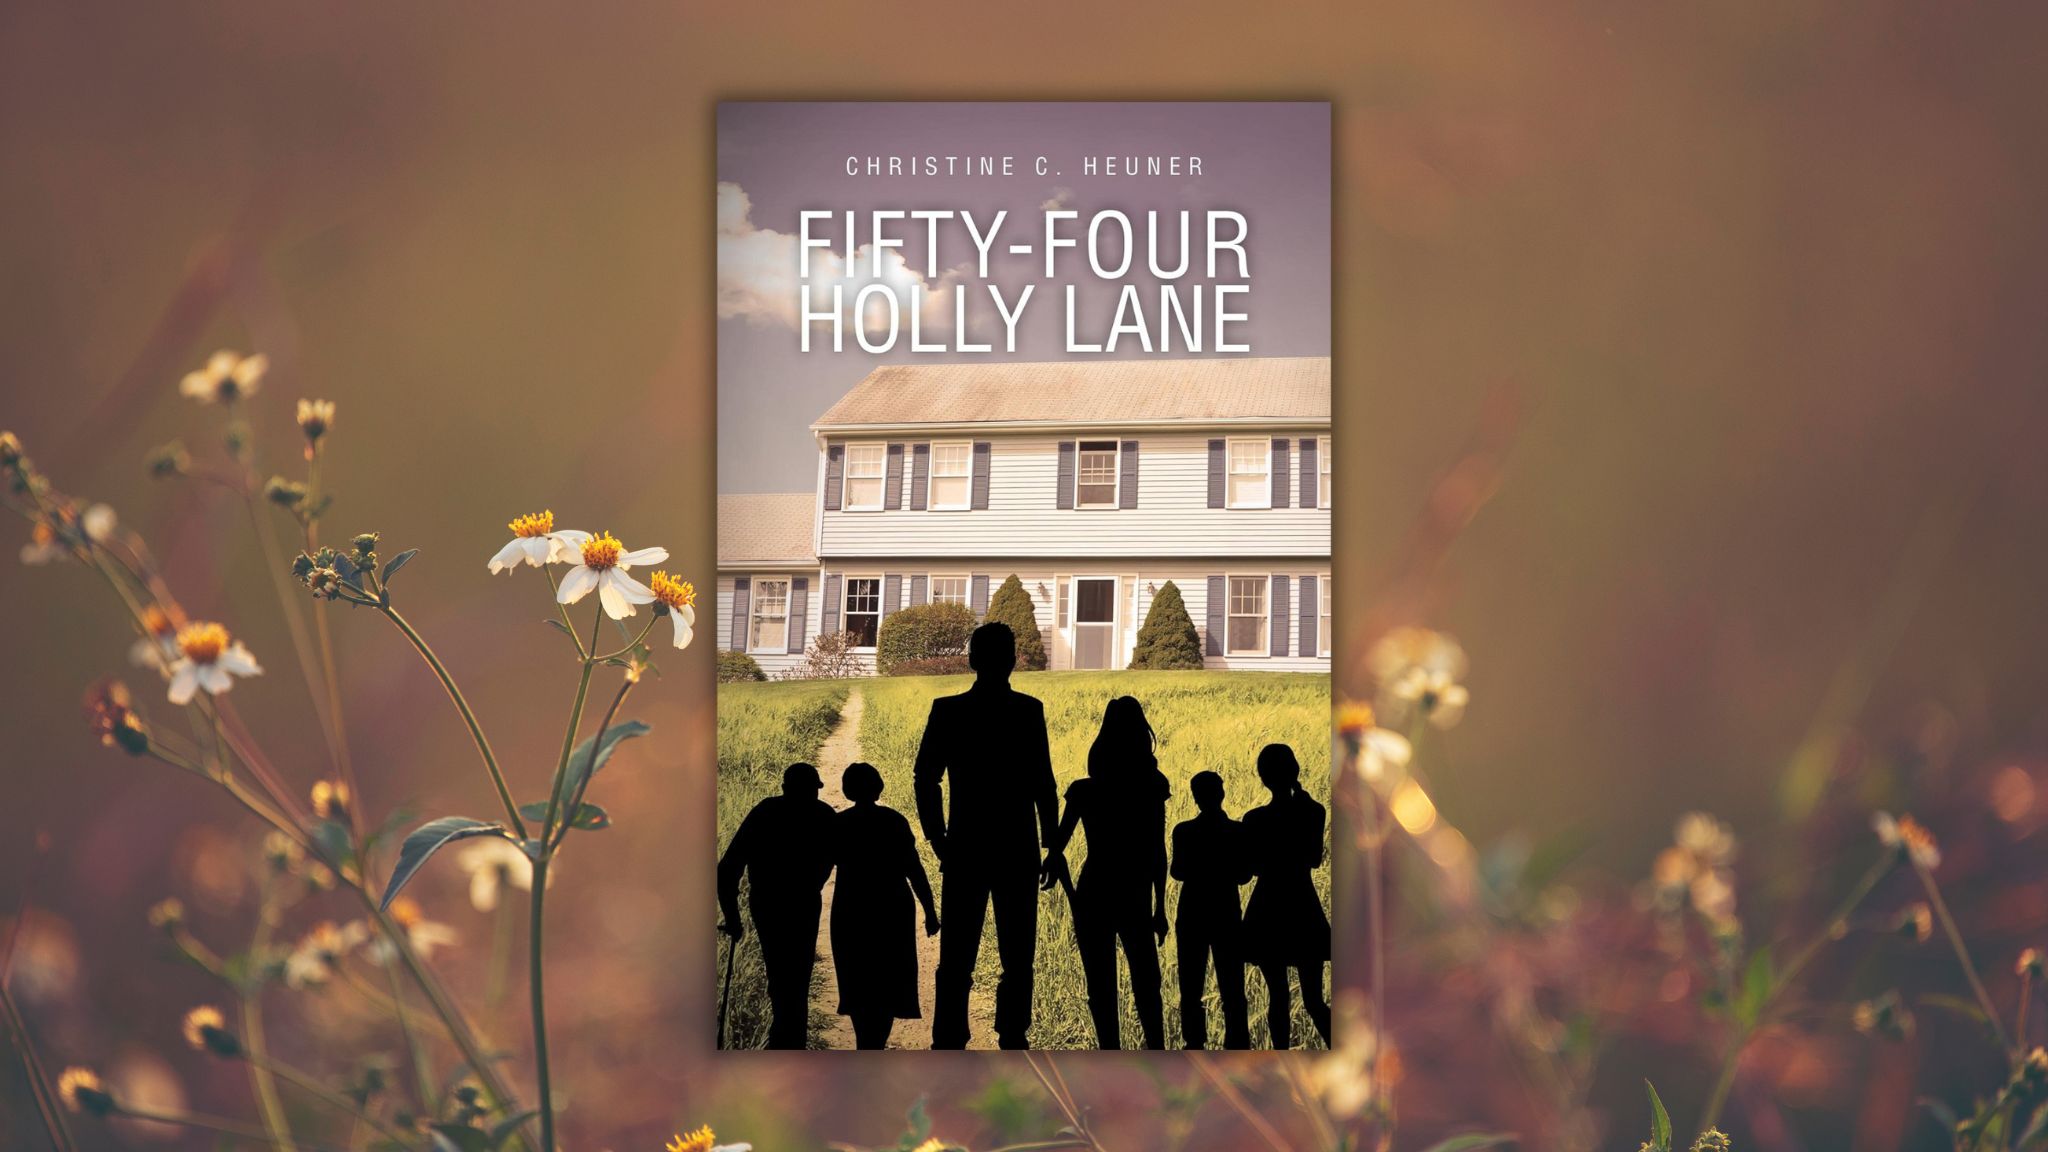 An Author’s Fictionalized Account of Three Generations Living Together